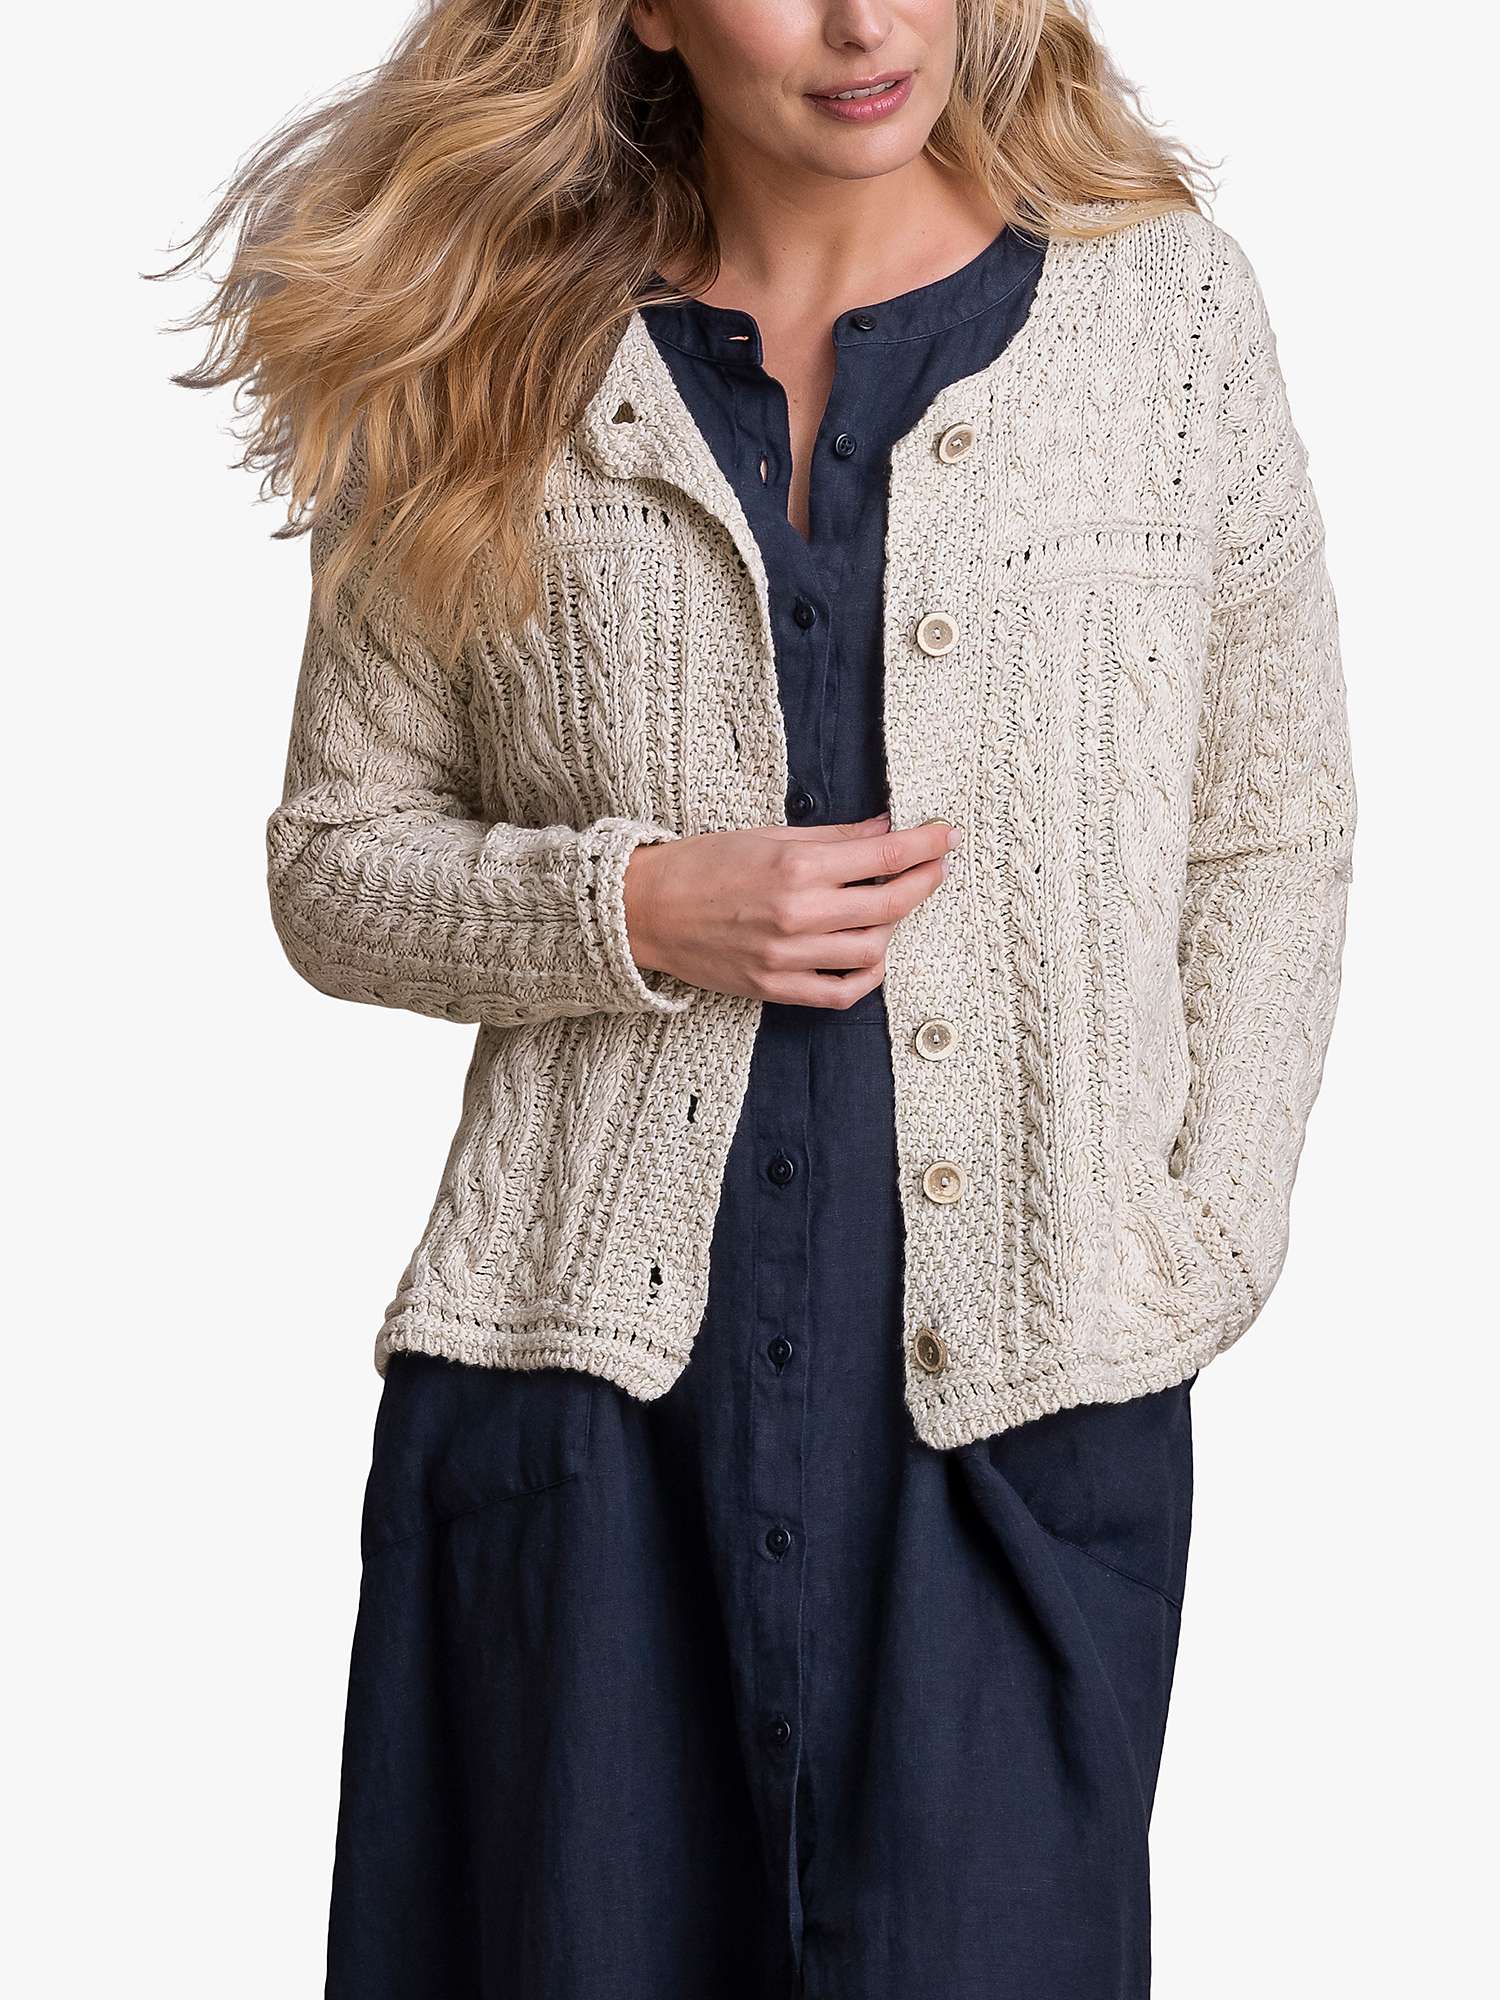 Buy Celtic & Co. Cotton Button Up Cardigan, Oatmeal Online at johnlewis.com